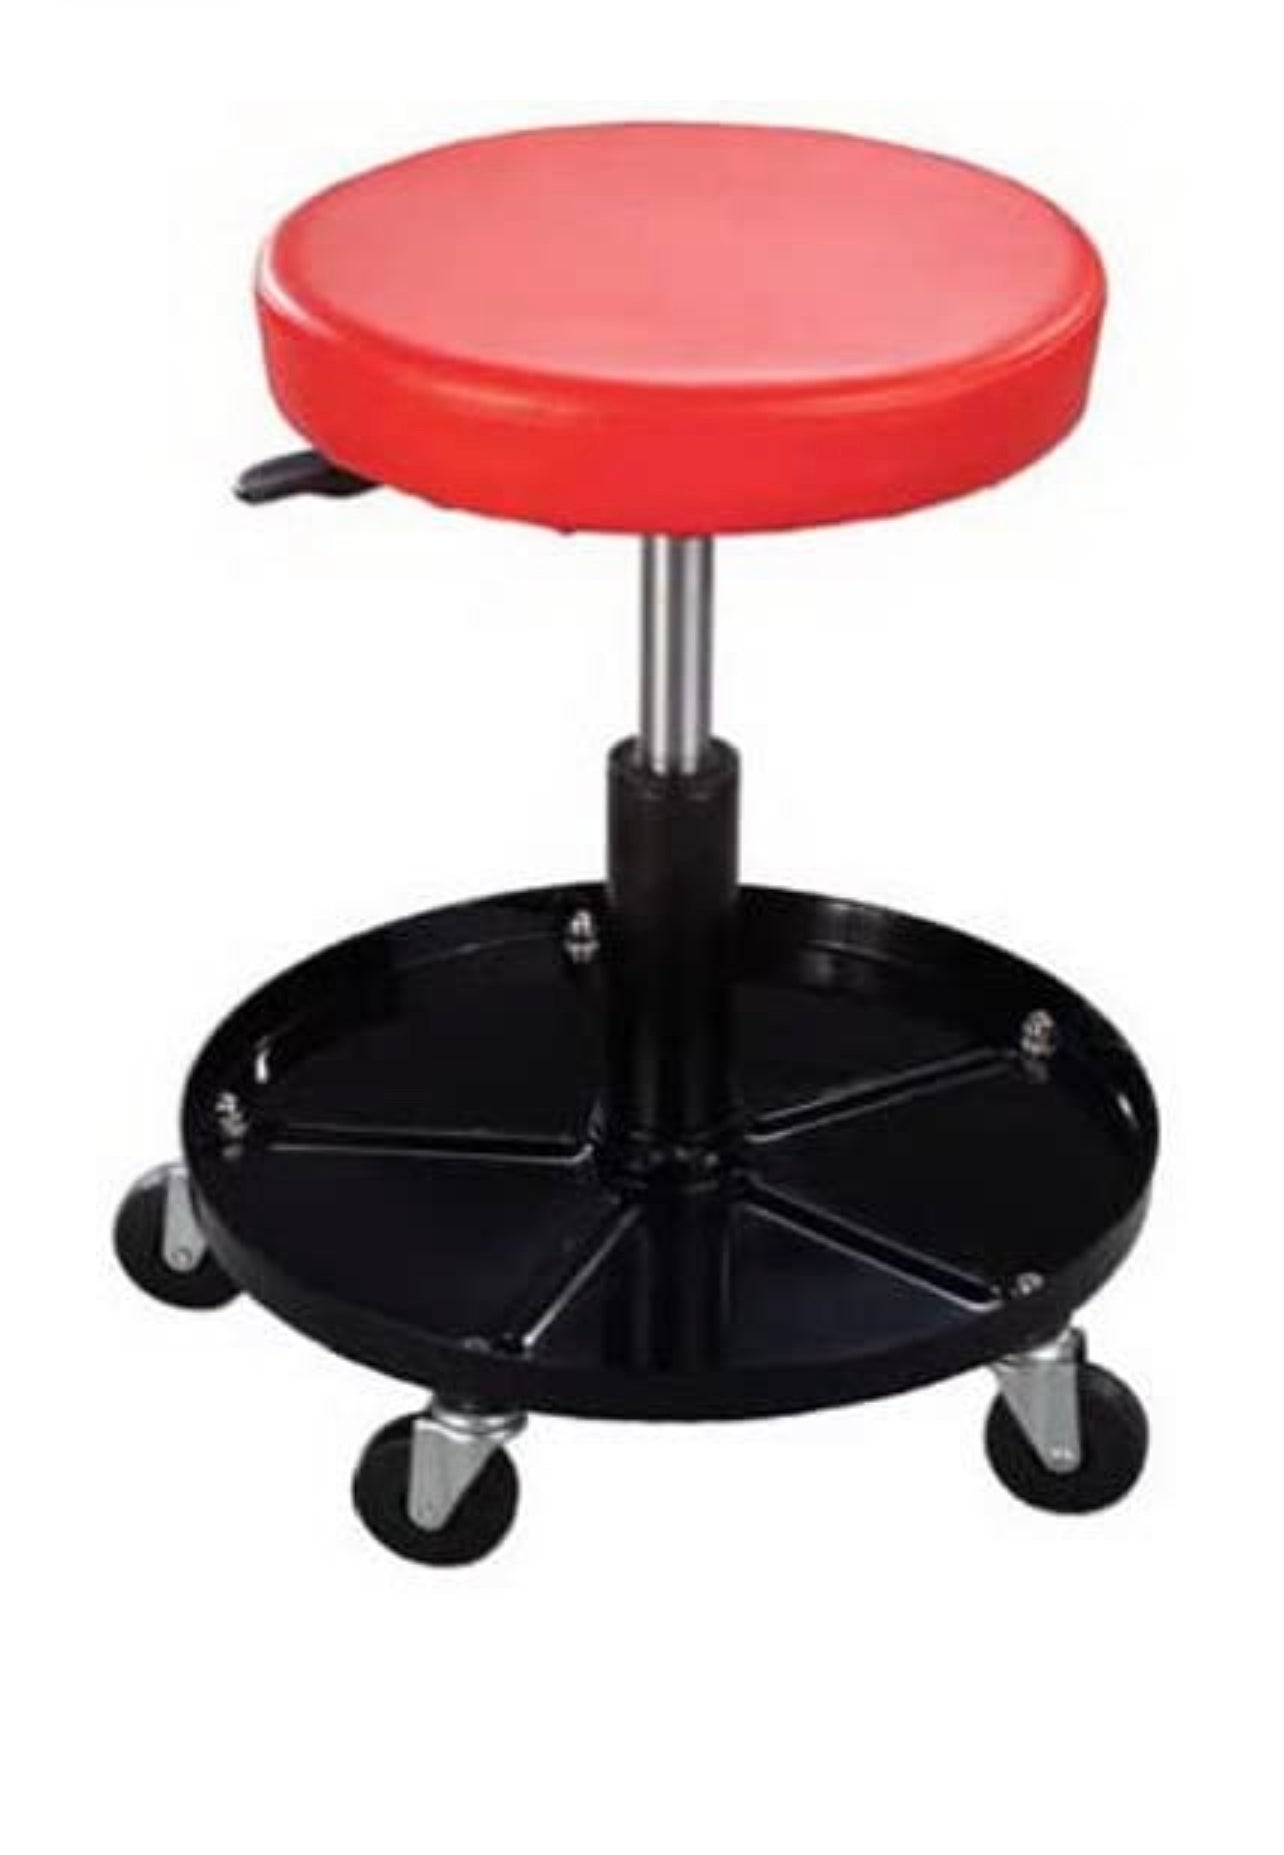 Pro-Lift C-3001 Pneumatic Chair with 300 lbs Capacity – Black / Red